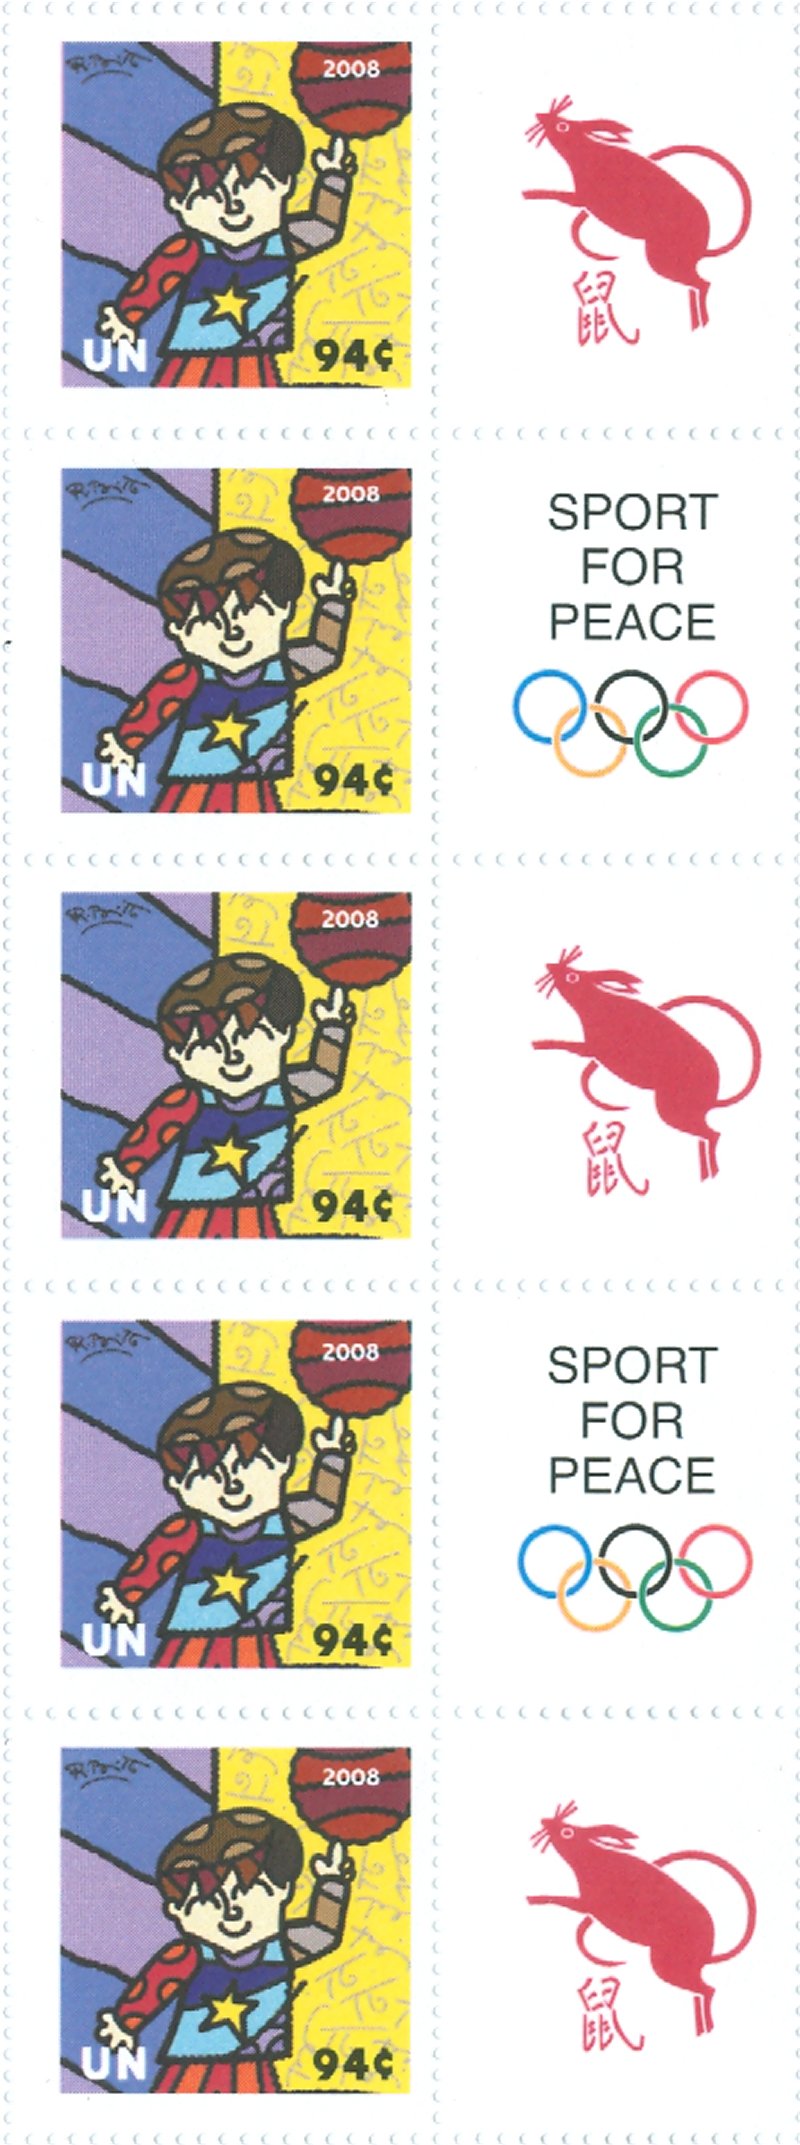 UNNY 965 94c Sports Personalized stamp, strip of 5 #ny965str5